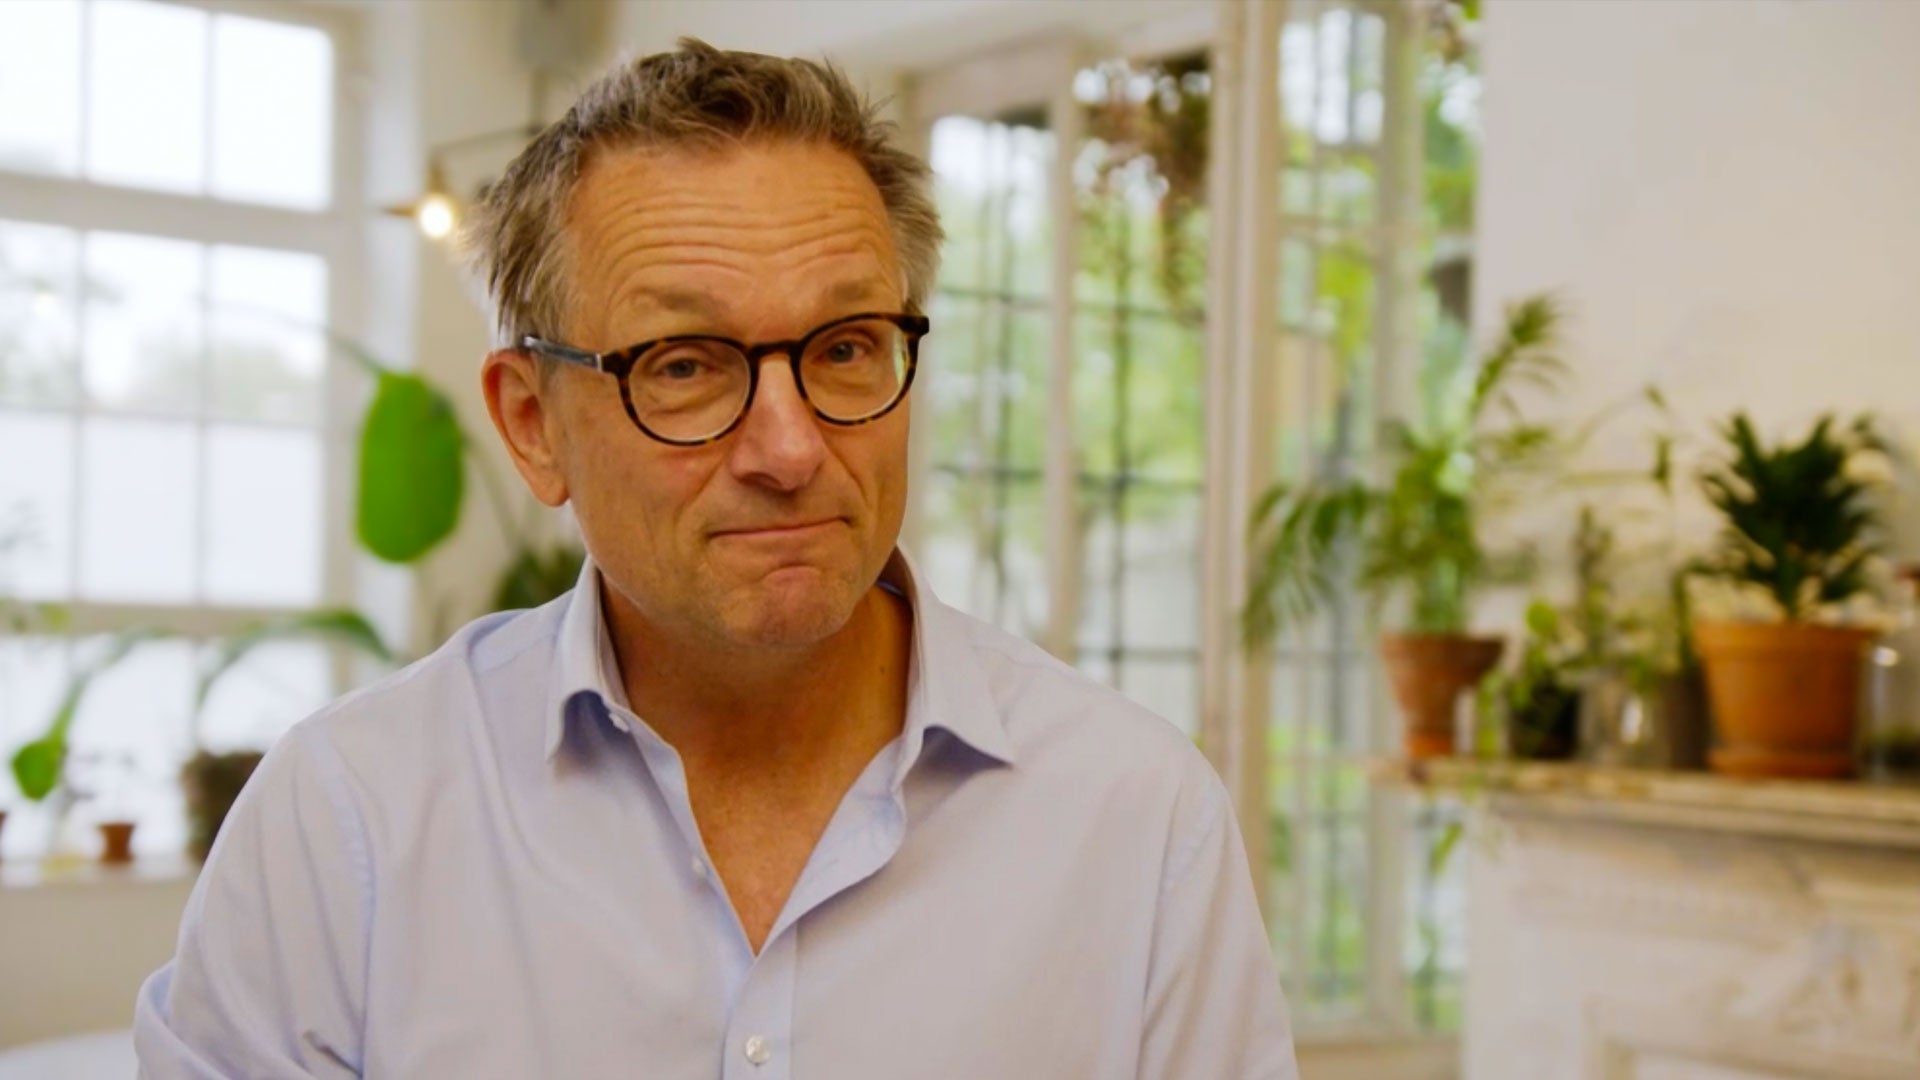 Michael Mosley believed you could make a big difference to your health by doing one small thing